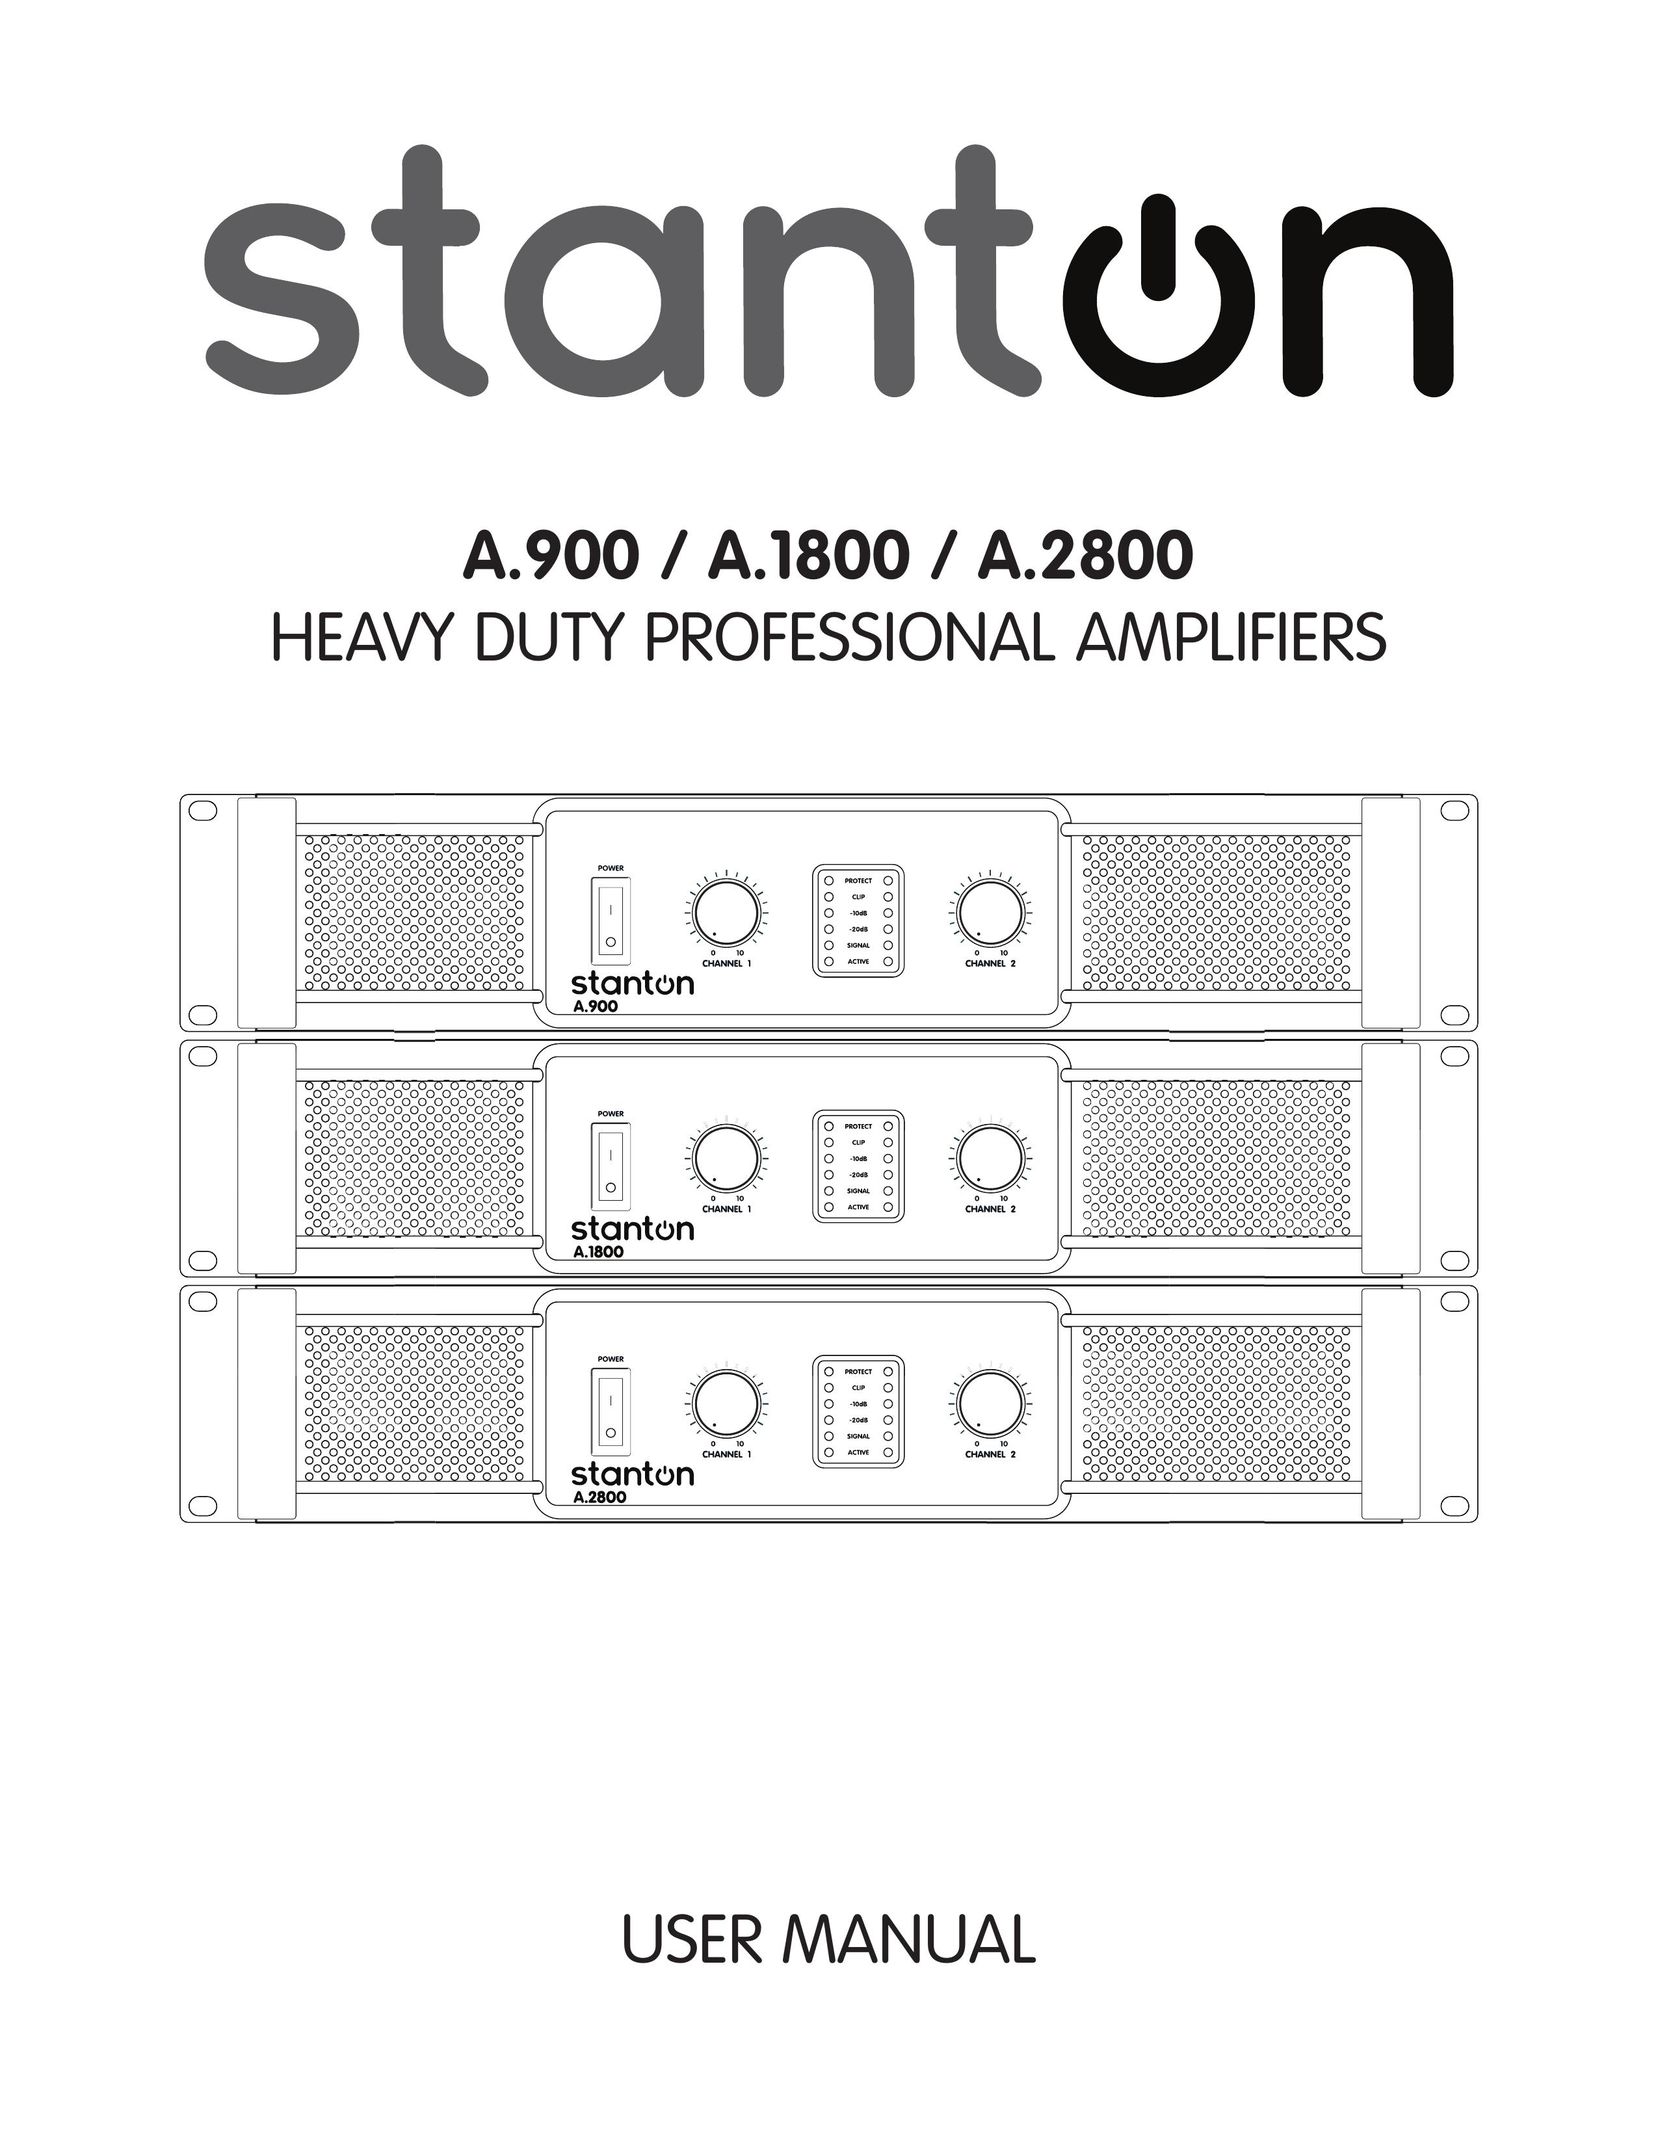 Stanton A.900 Stereo Amplifier User Manual